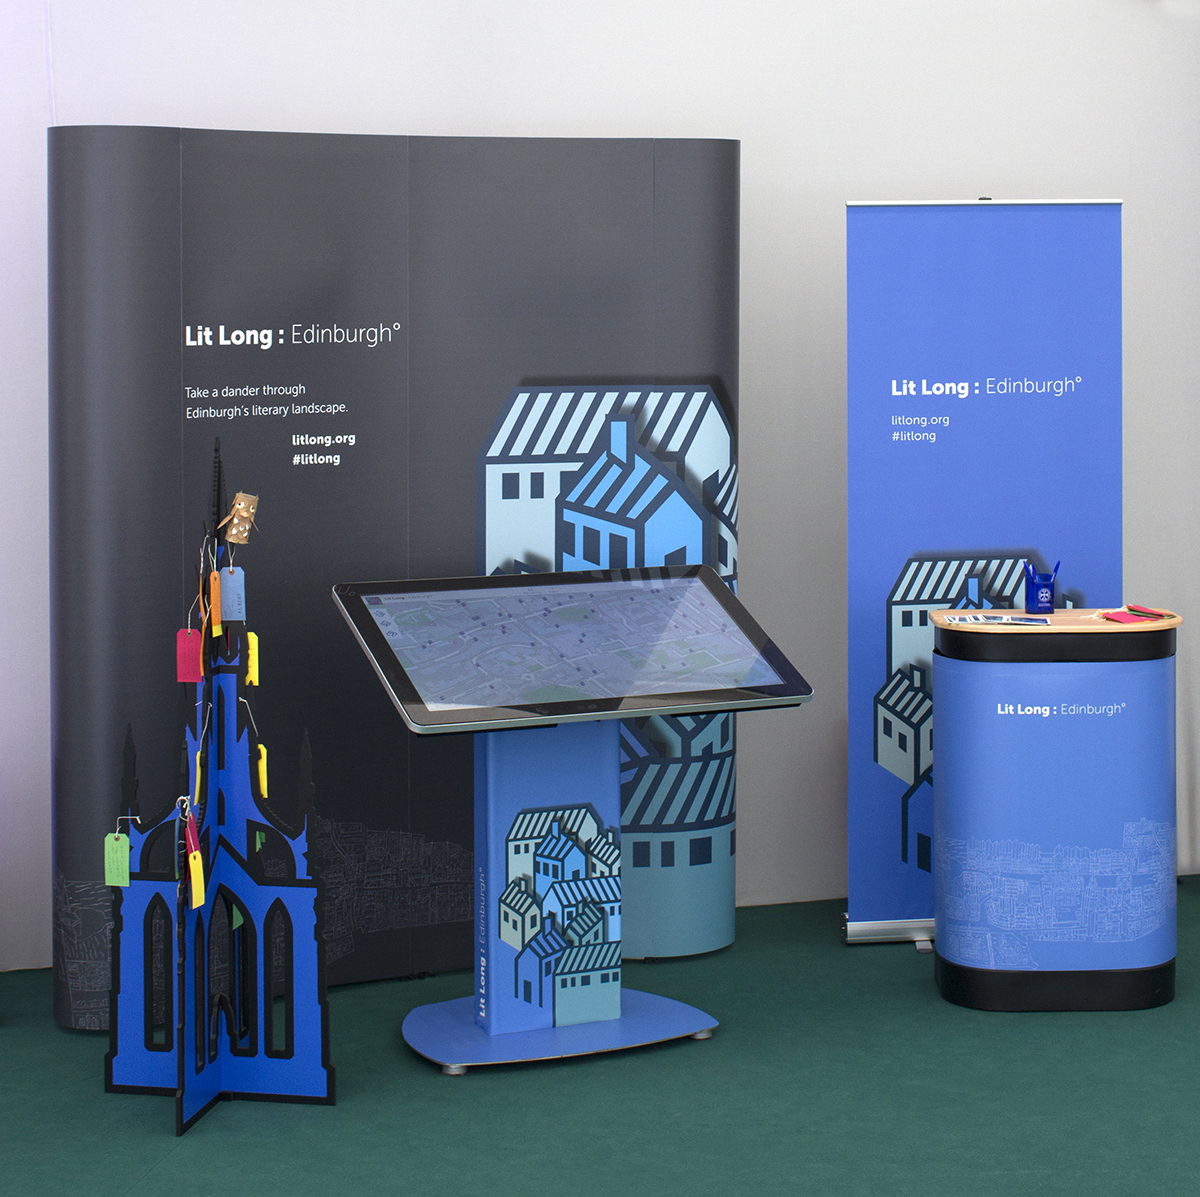 LitLong promotional stand